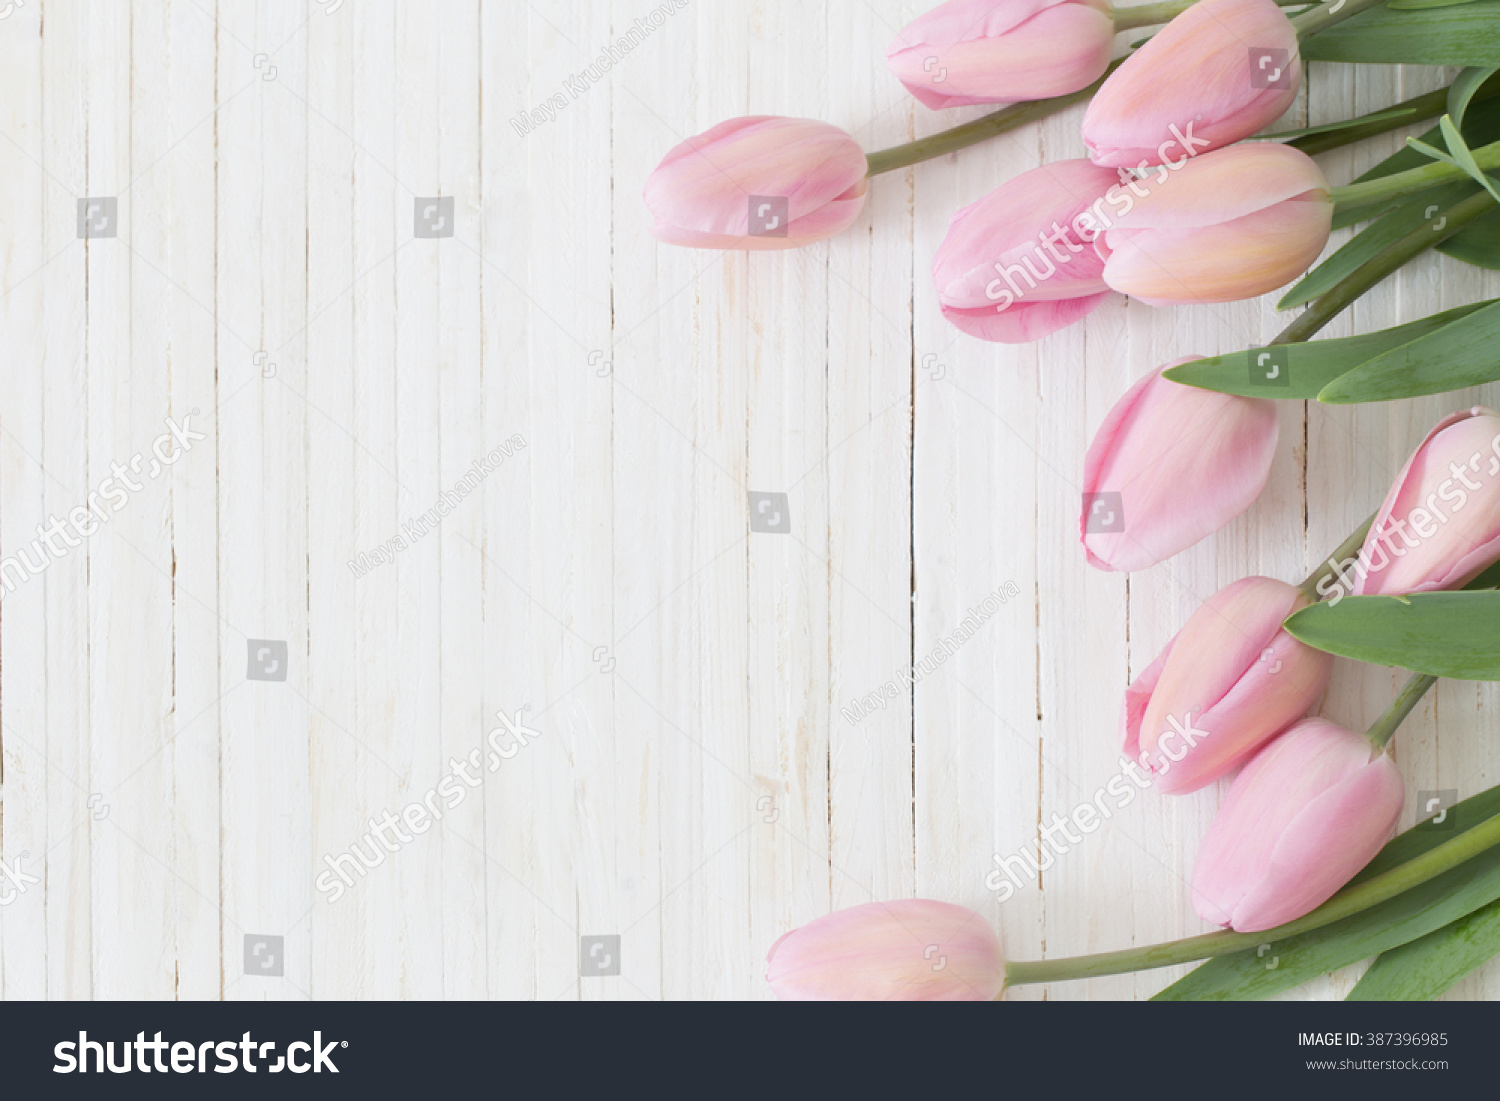 beautiful tulips on wooden background #387396985